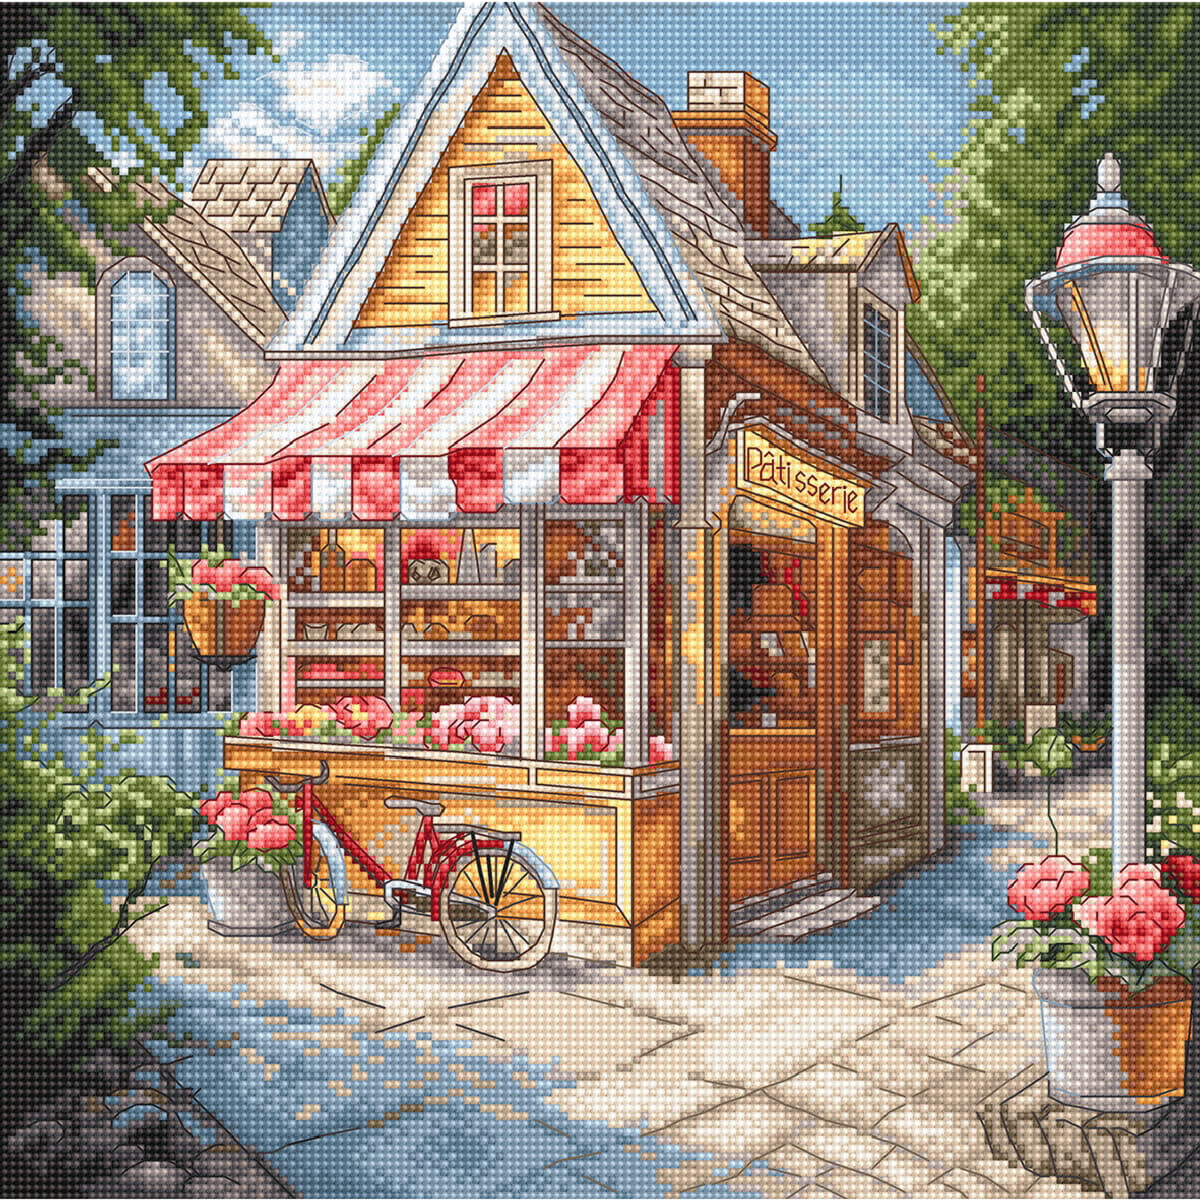 An illustration of a quaint patisserie with a red and...